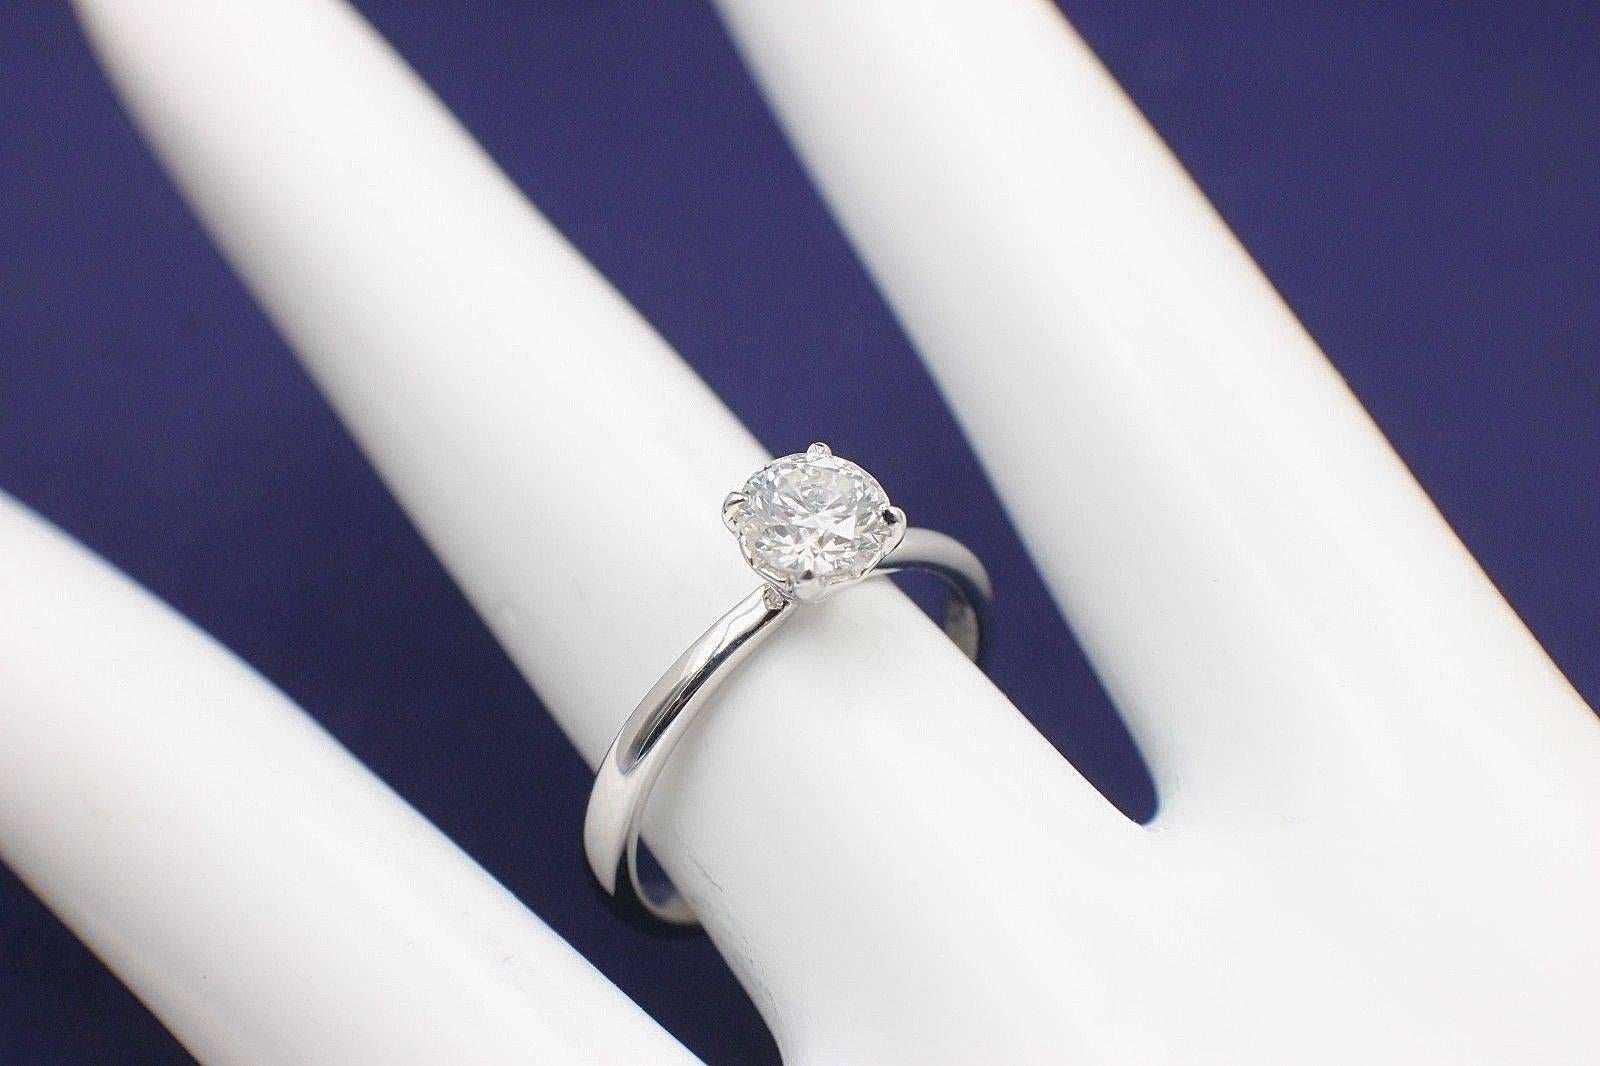 Hearts on Fire Round 0.667ct Flawless Diamond Engagement Ring in 18k White Gold In Excellent Condition For Sale In San Diego, CA